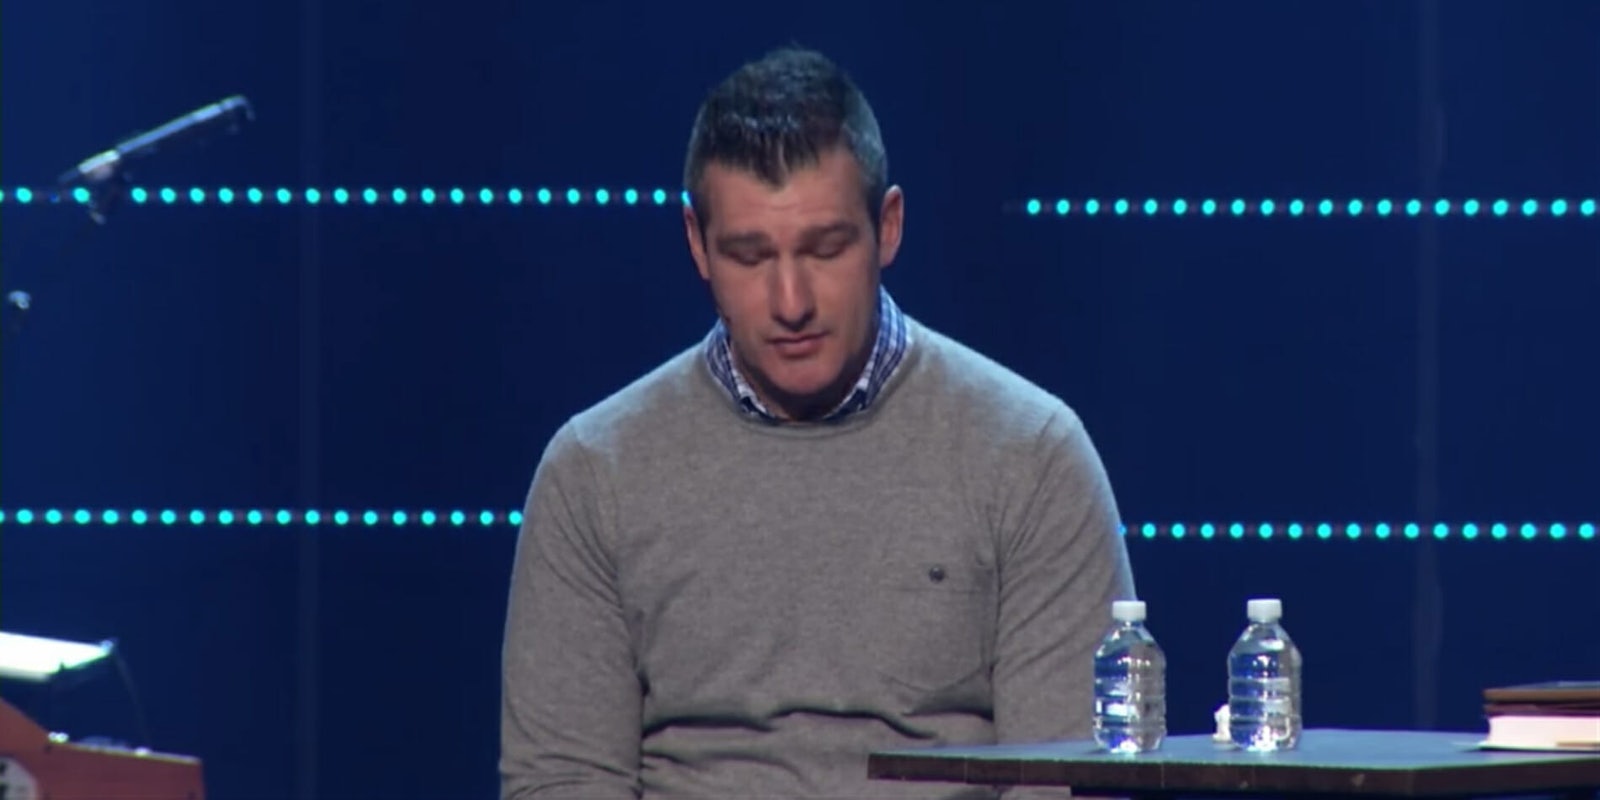 Megachurch pastor Andy Savage confessed to an alleged sexual assault on Sunday.